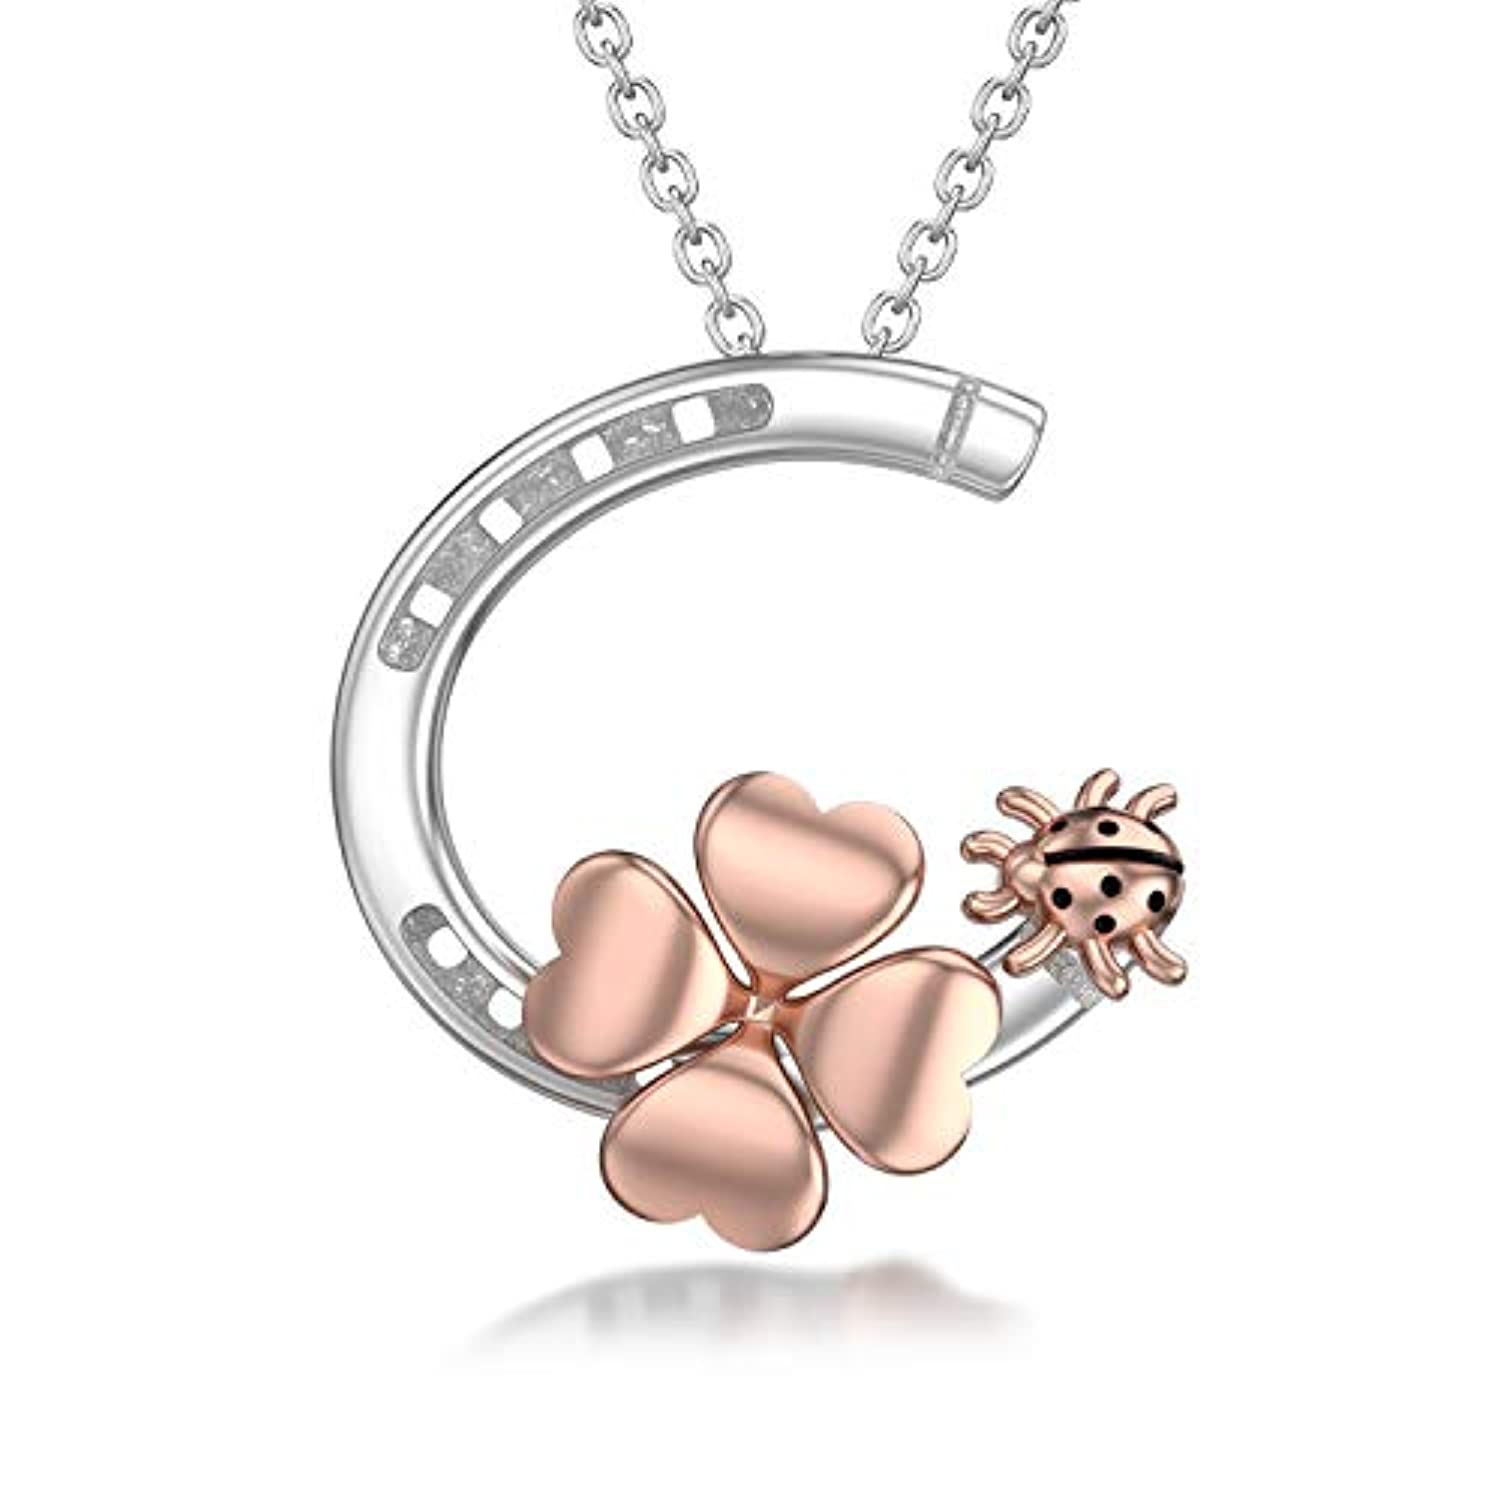 Lucky Four Leaf Clover Sterling Silver Rose Gold Chain Necklace For Women